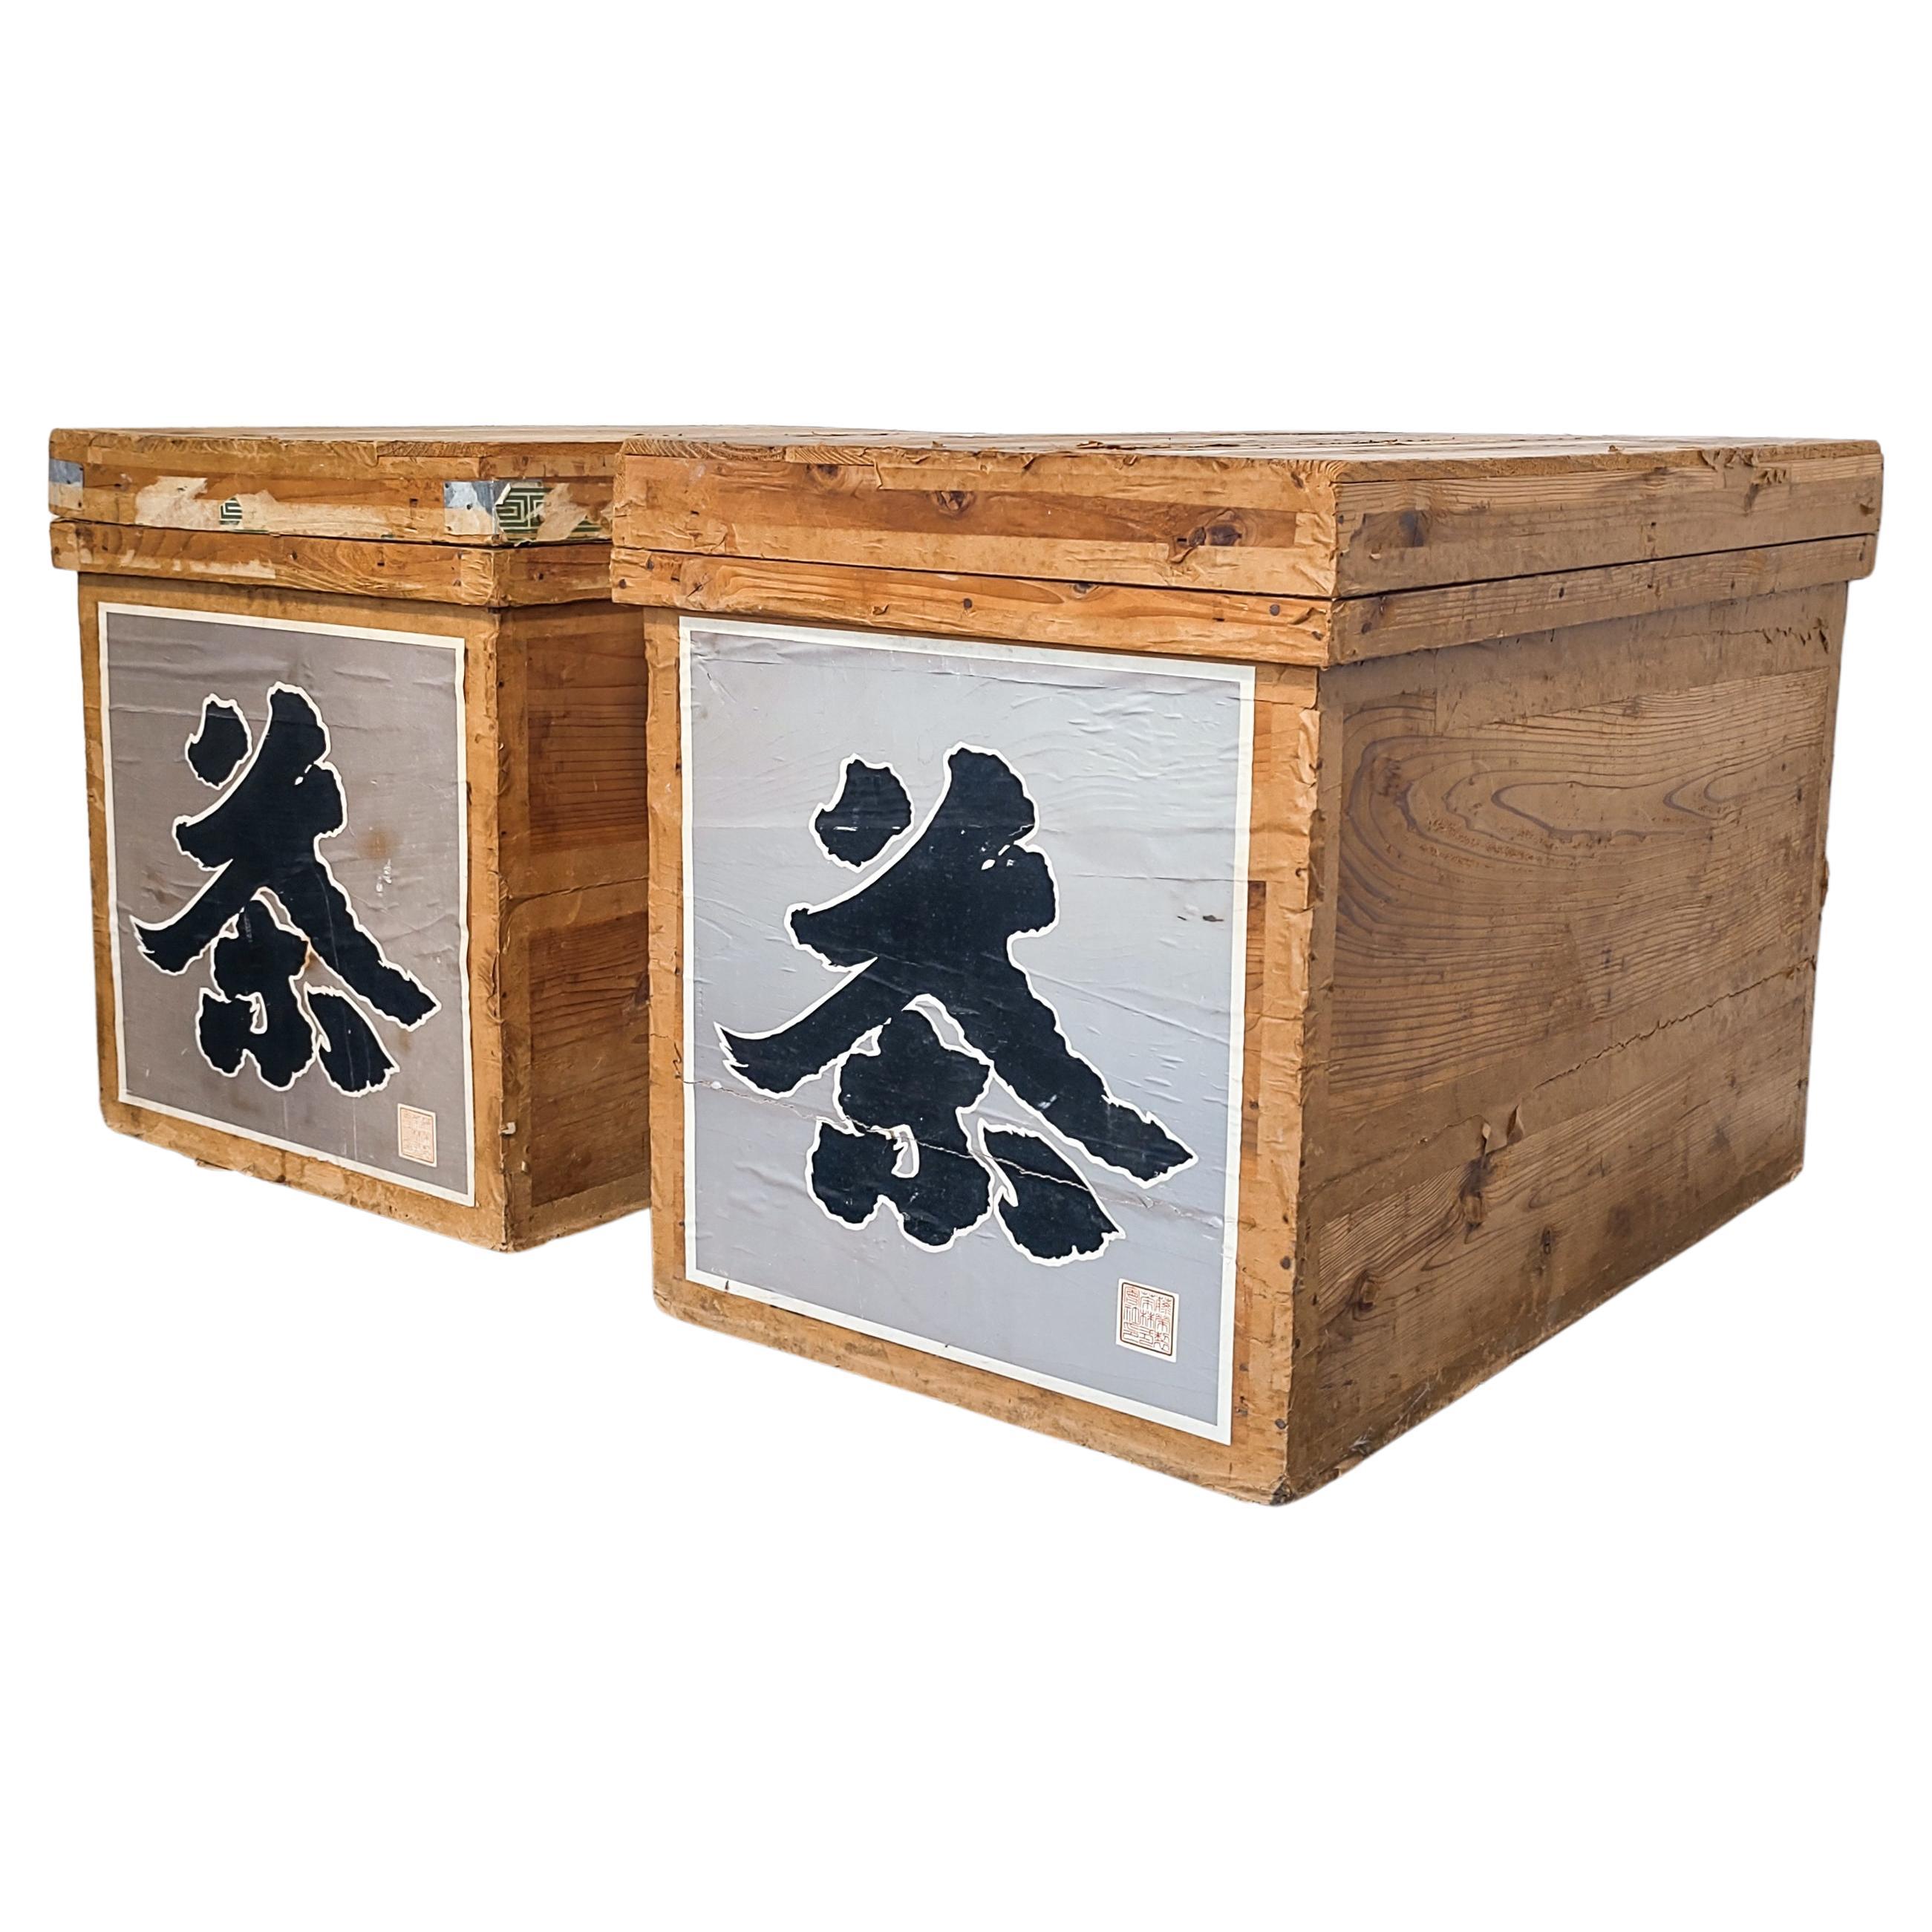 Early 20th Century Pair of '2' Japanese Tea Crates with Tin Lining